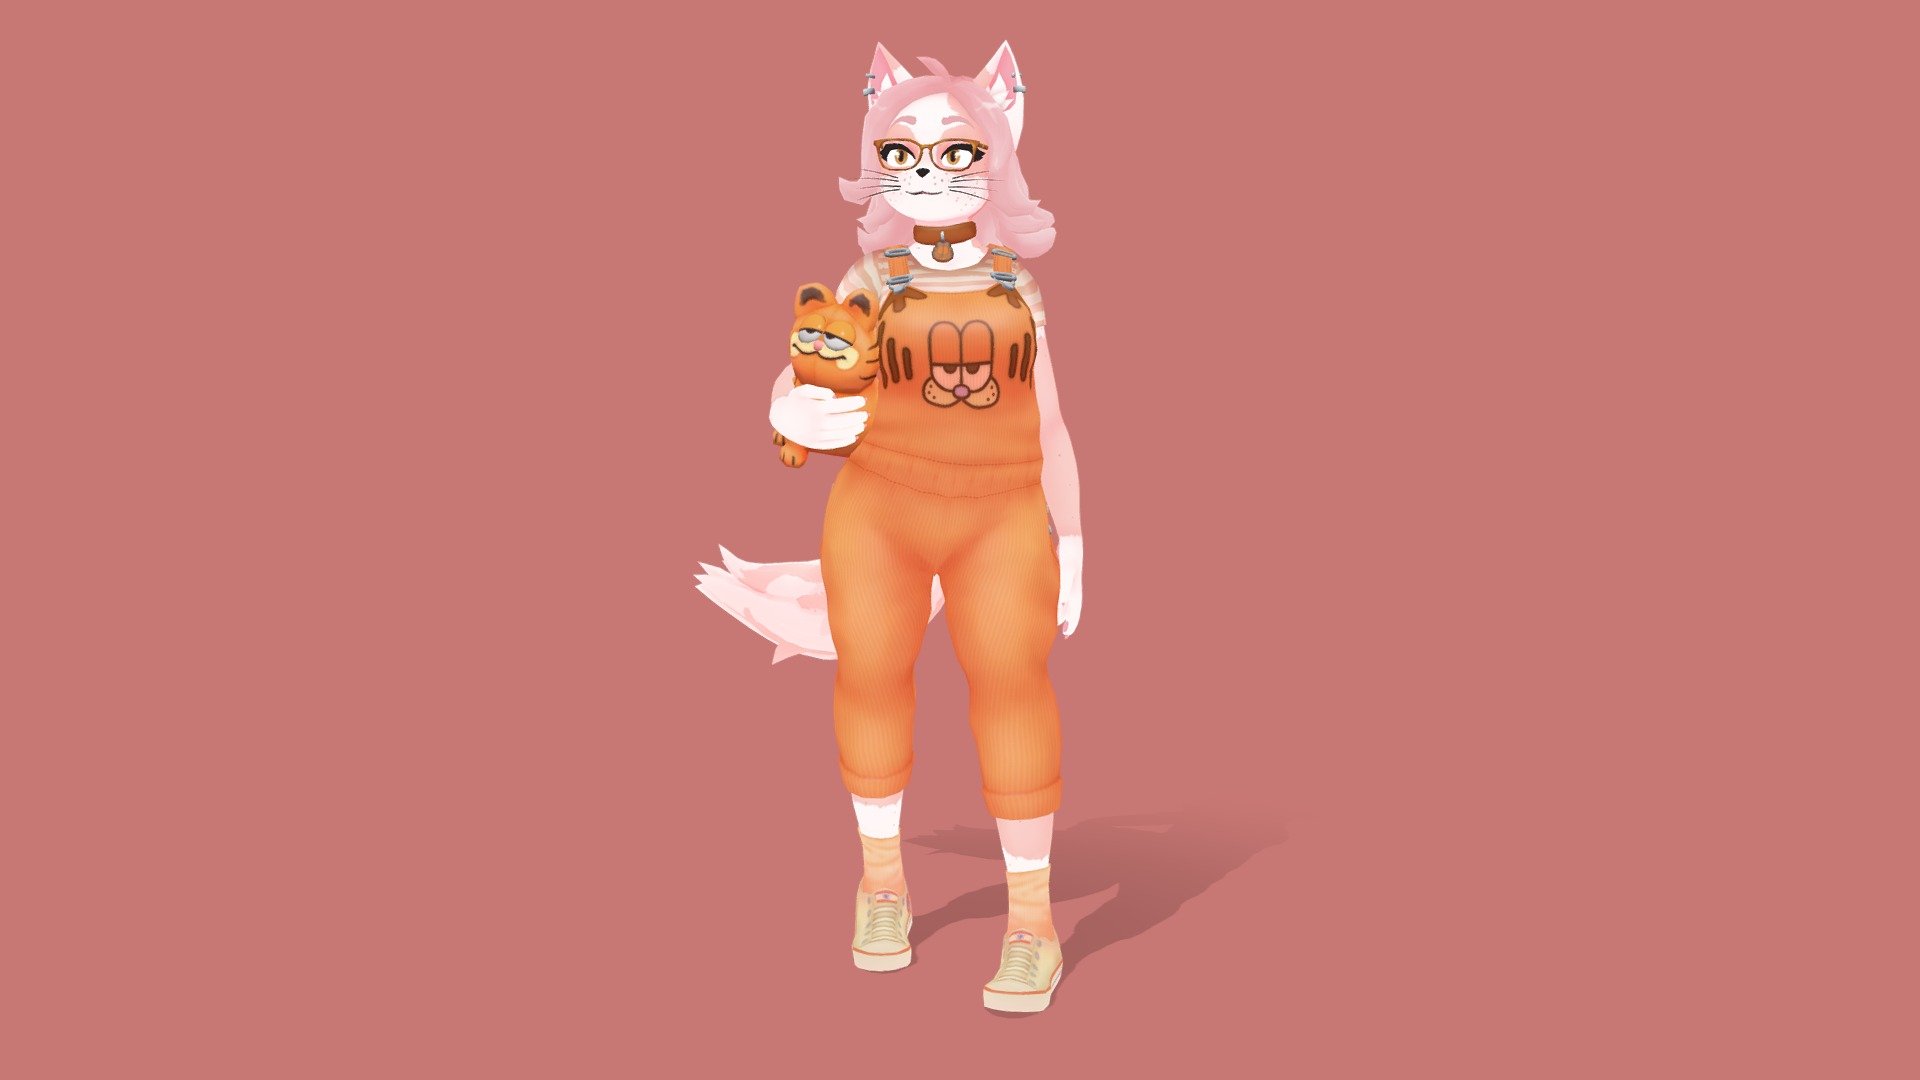 Made my second VrChat Avatar, I recreated the same design from a year ago, but this time with a proper body model, blendshapes, and multiple props.
Sculpted in Zbrush. Retopology was done in Maya for both low and high poly as well as rigging. Textured entirely in Substance Painter 3d model